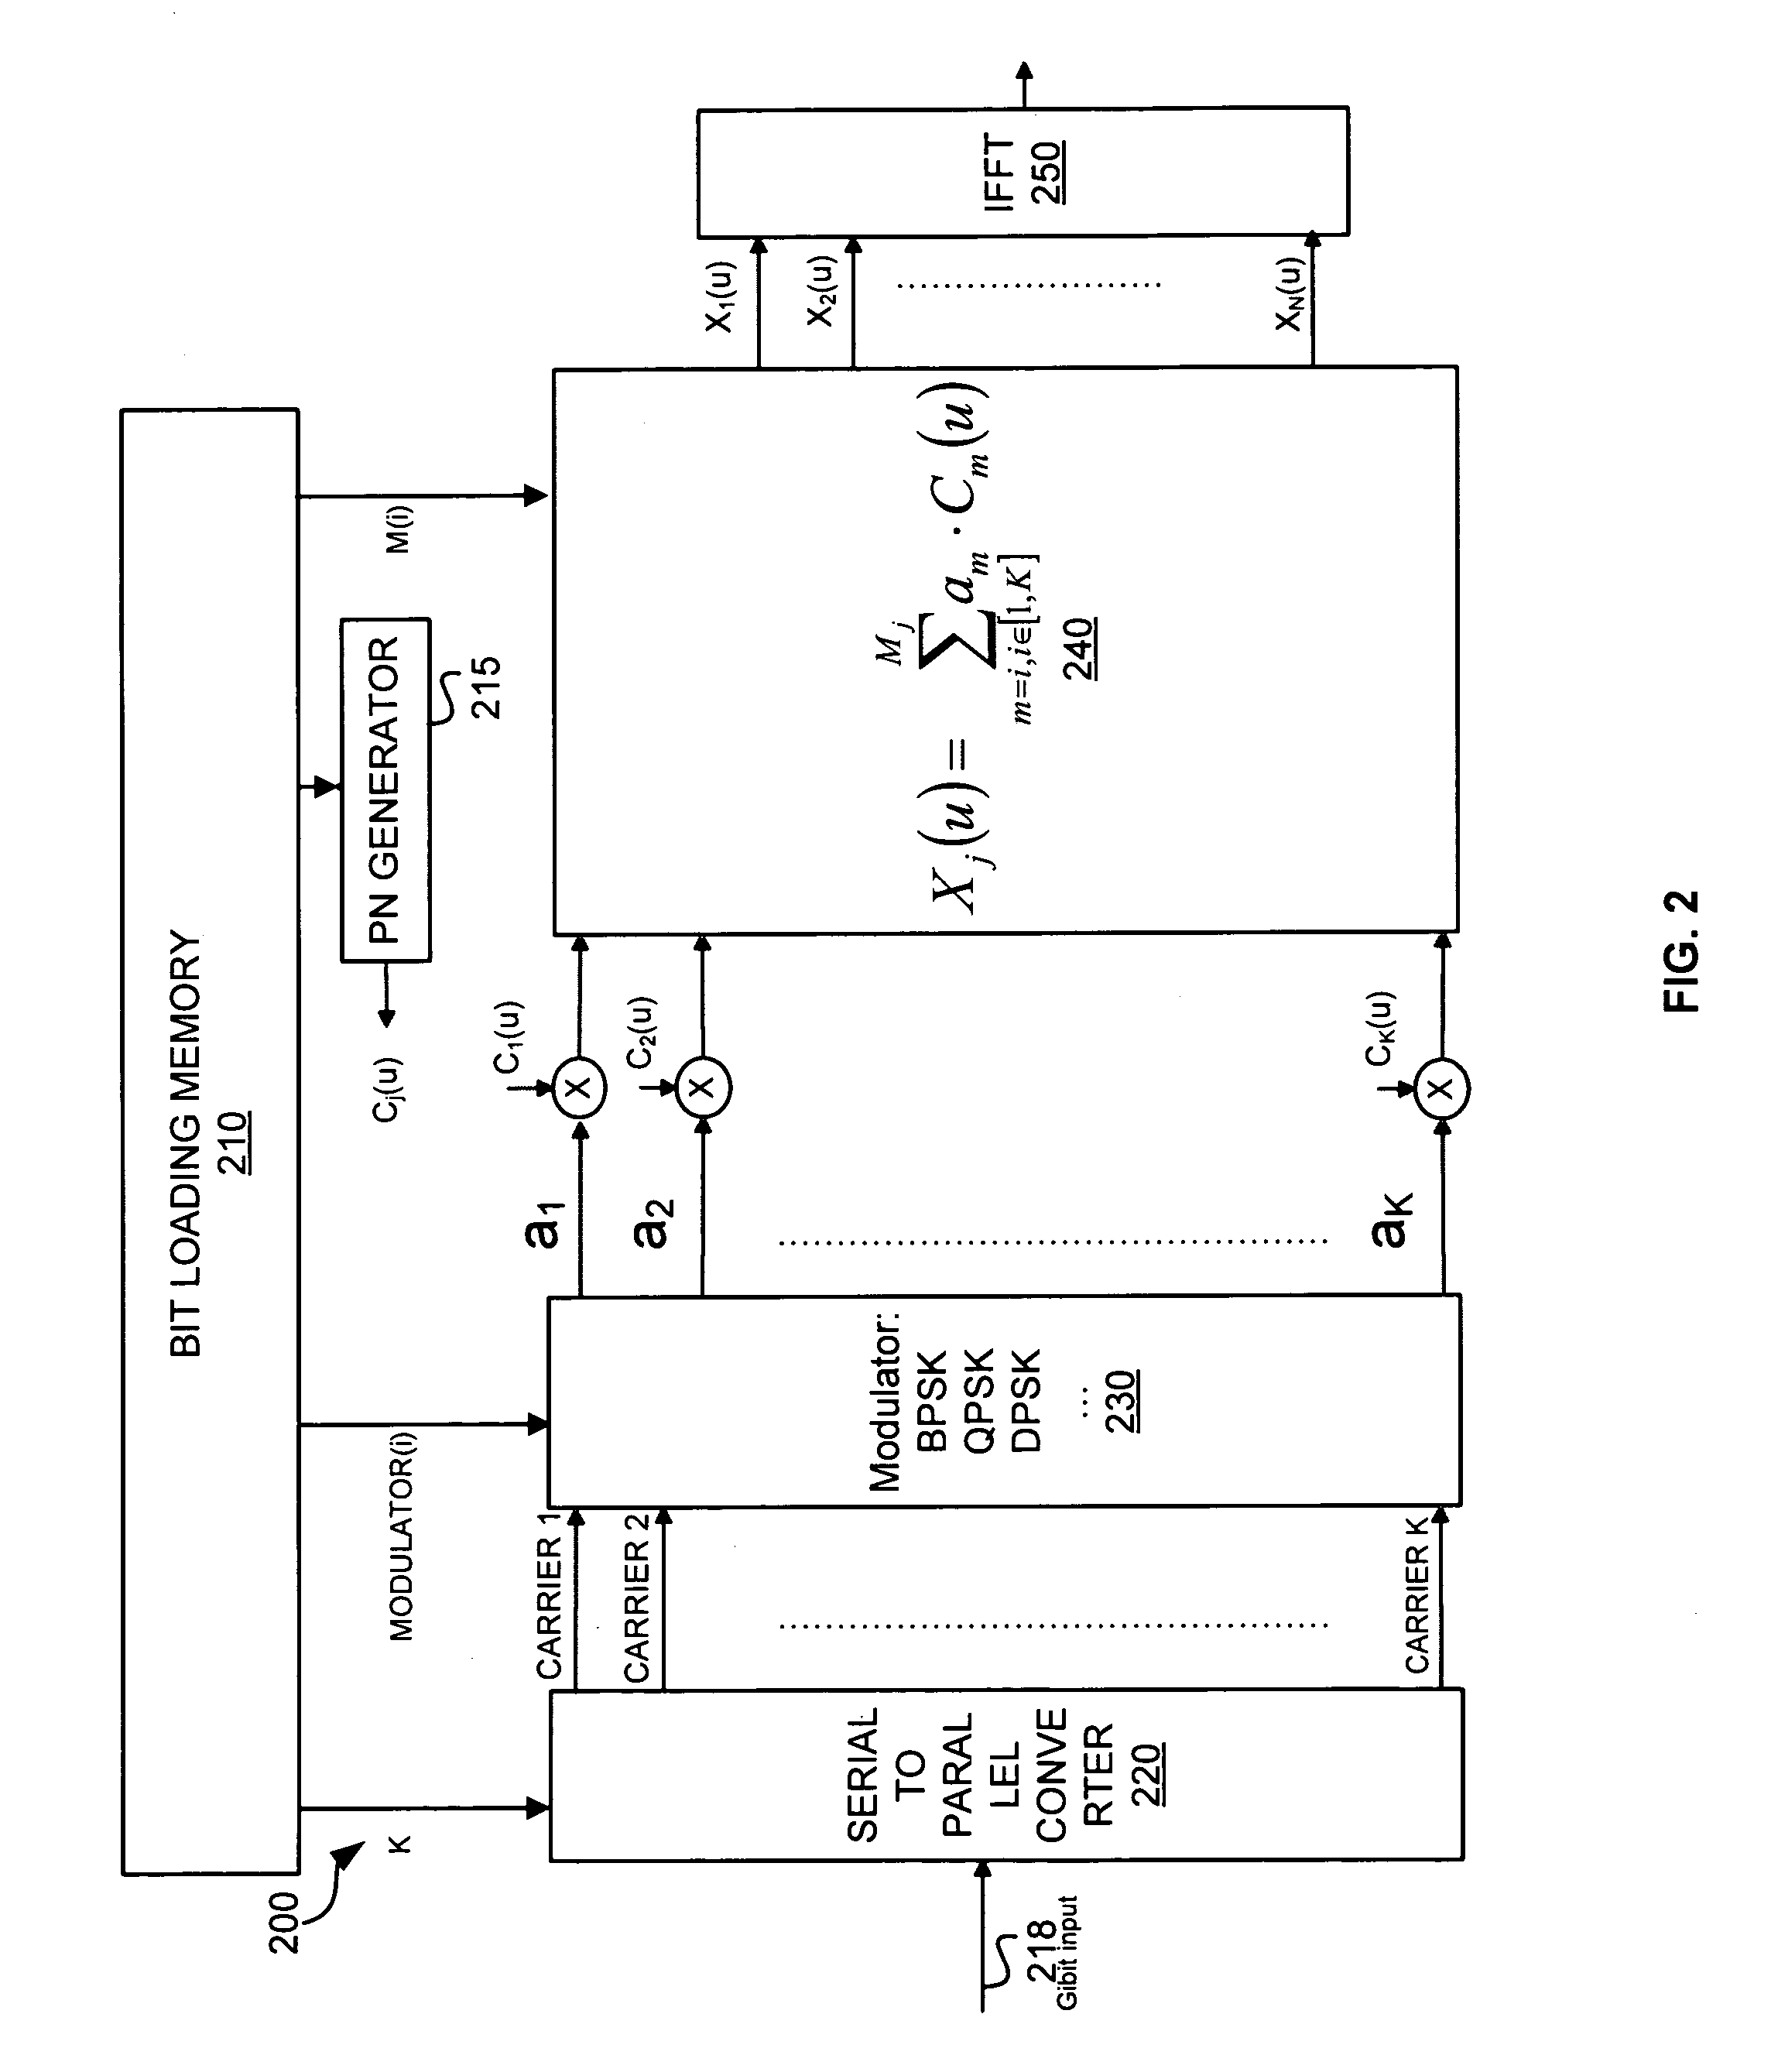 Adaptative multi-carrier code division multiple access